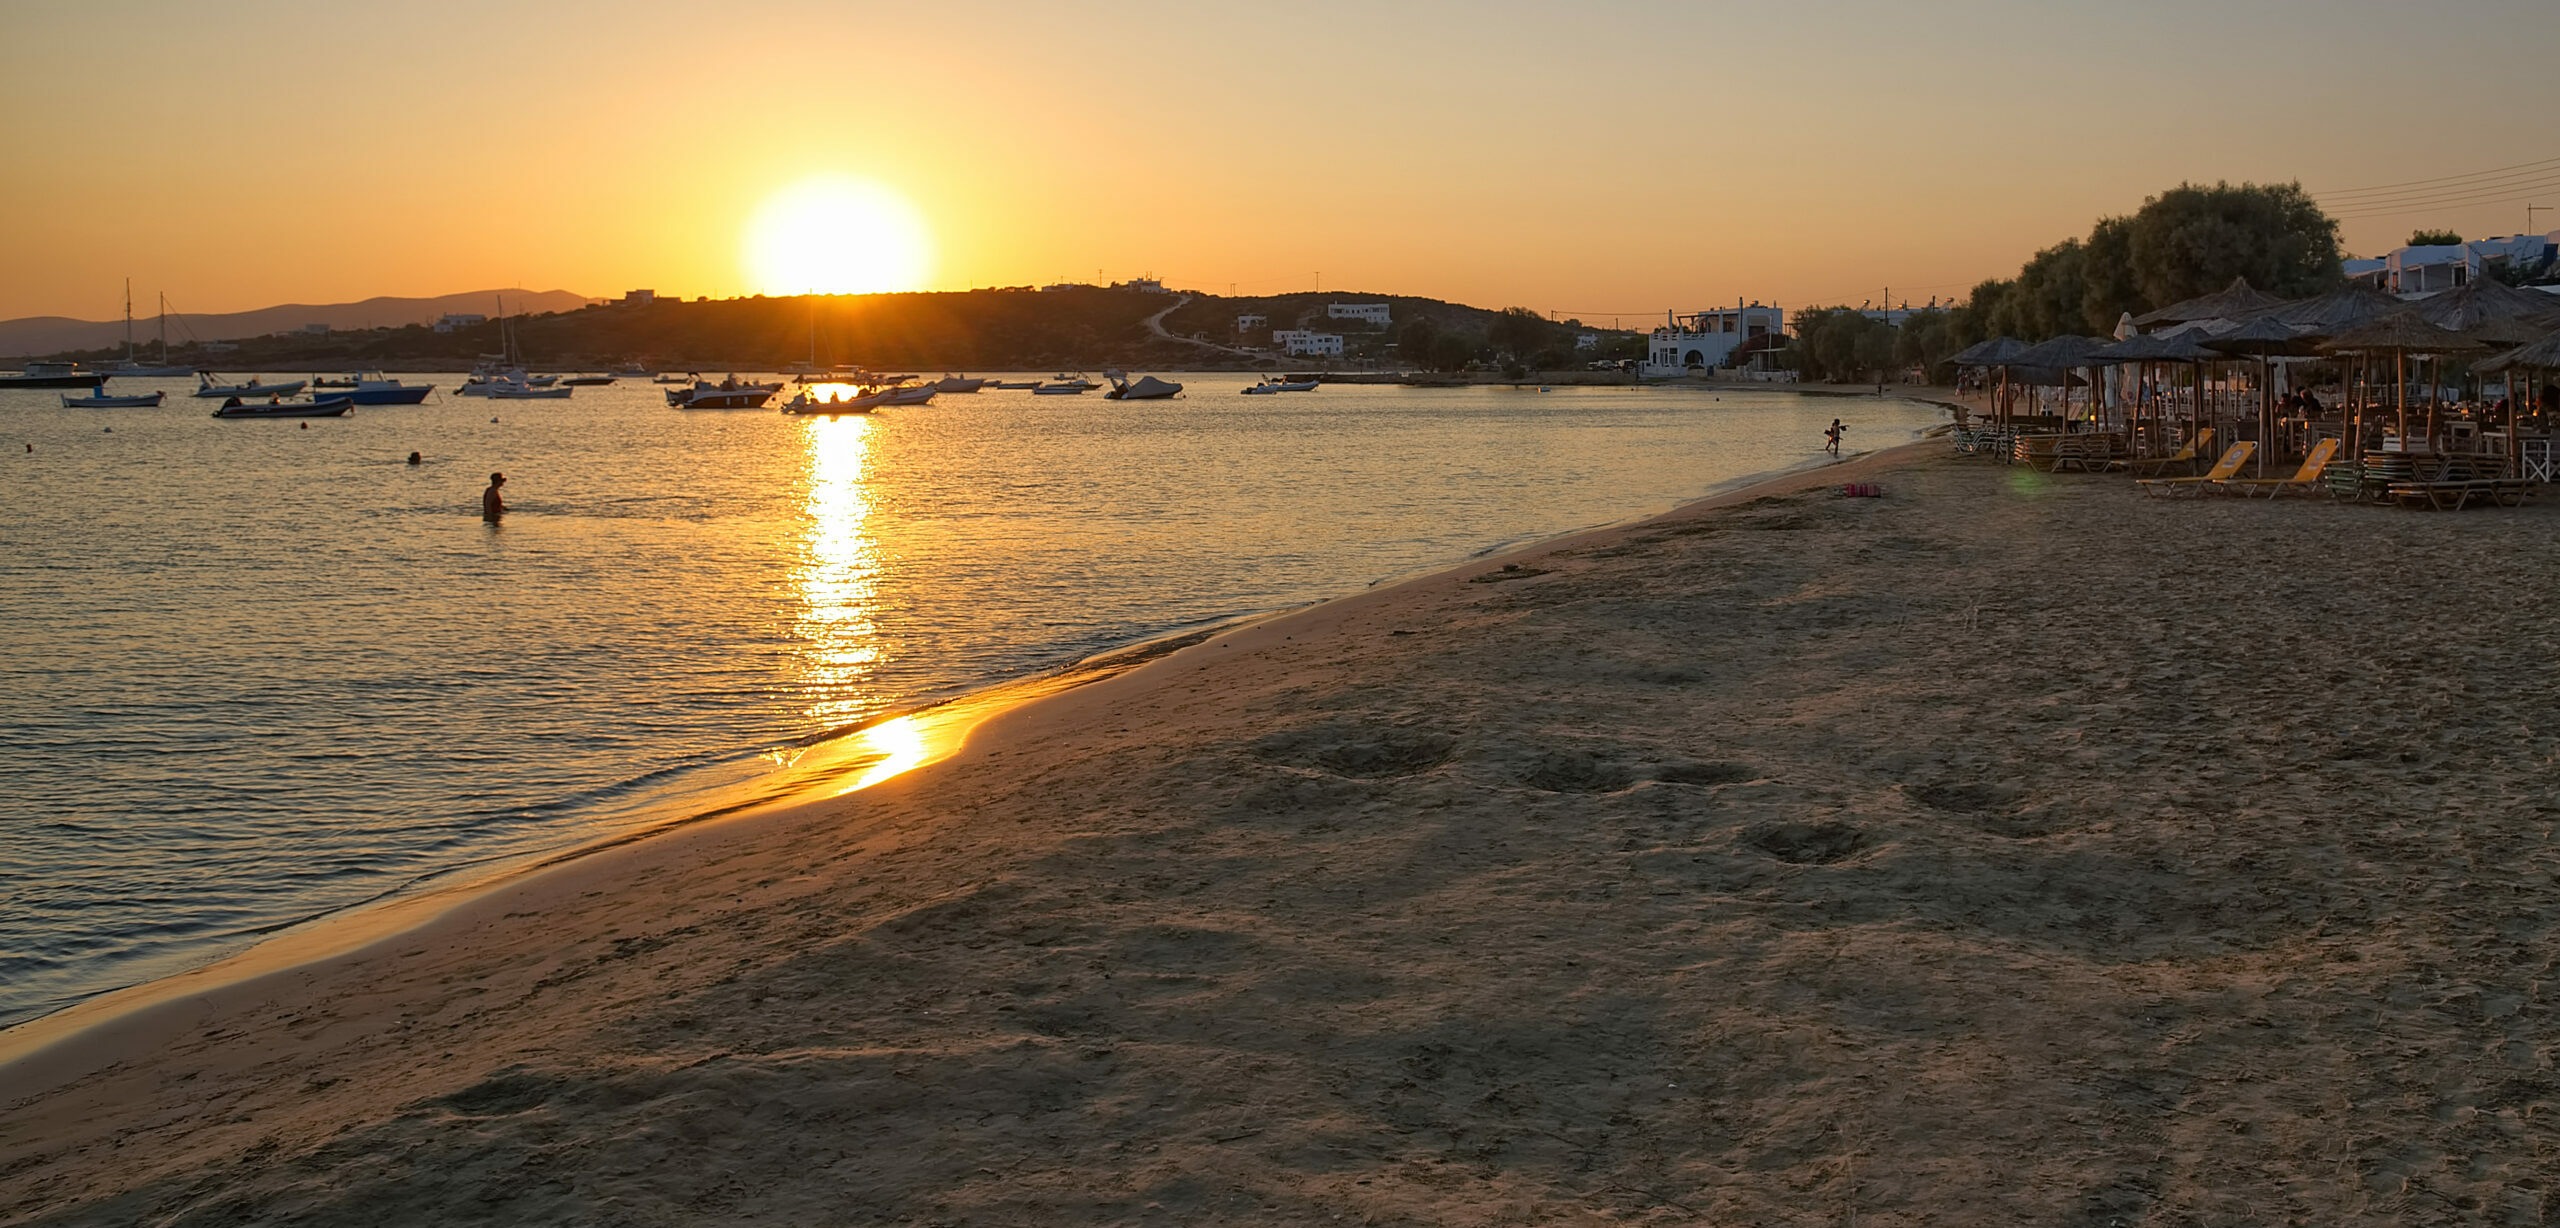 The incomparable beach of Aliki at Paros